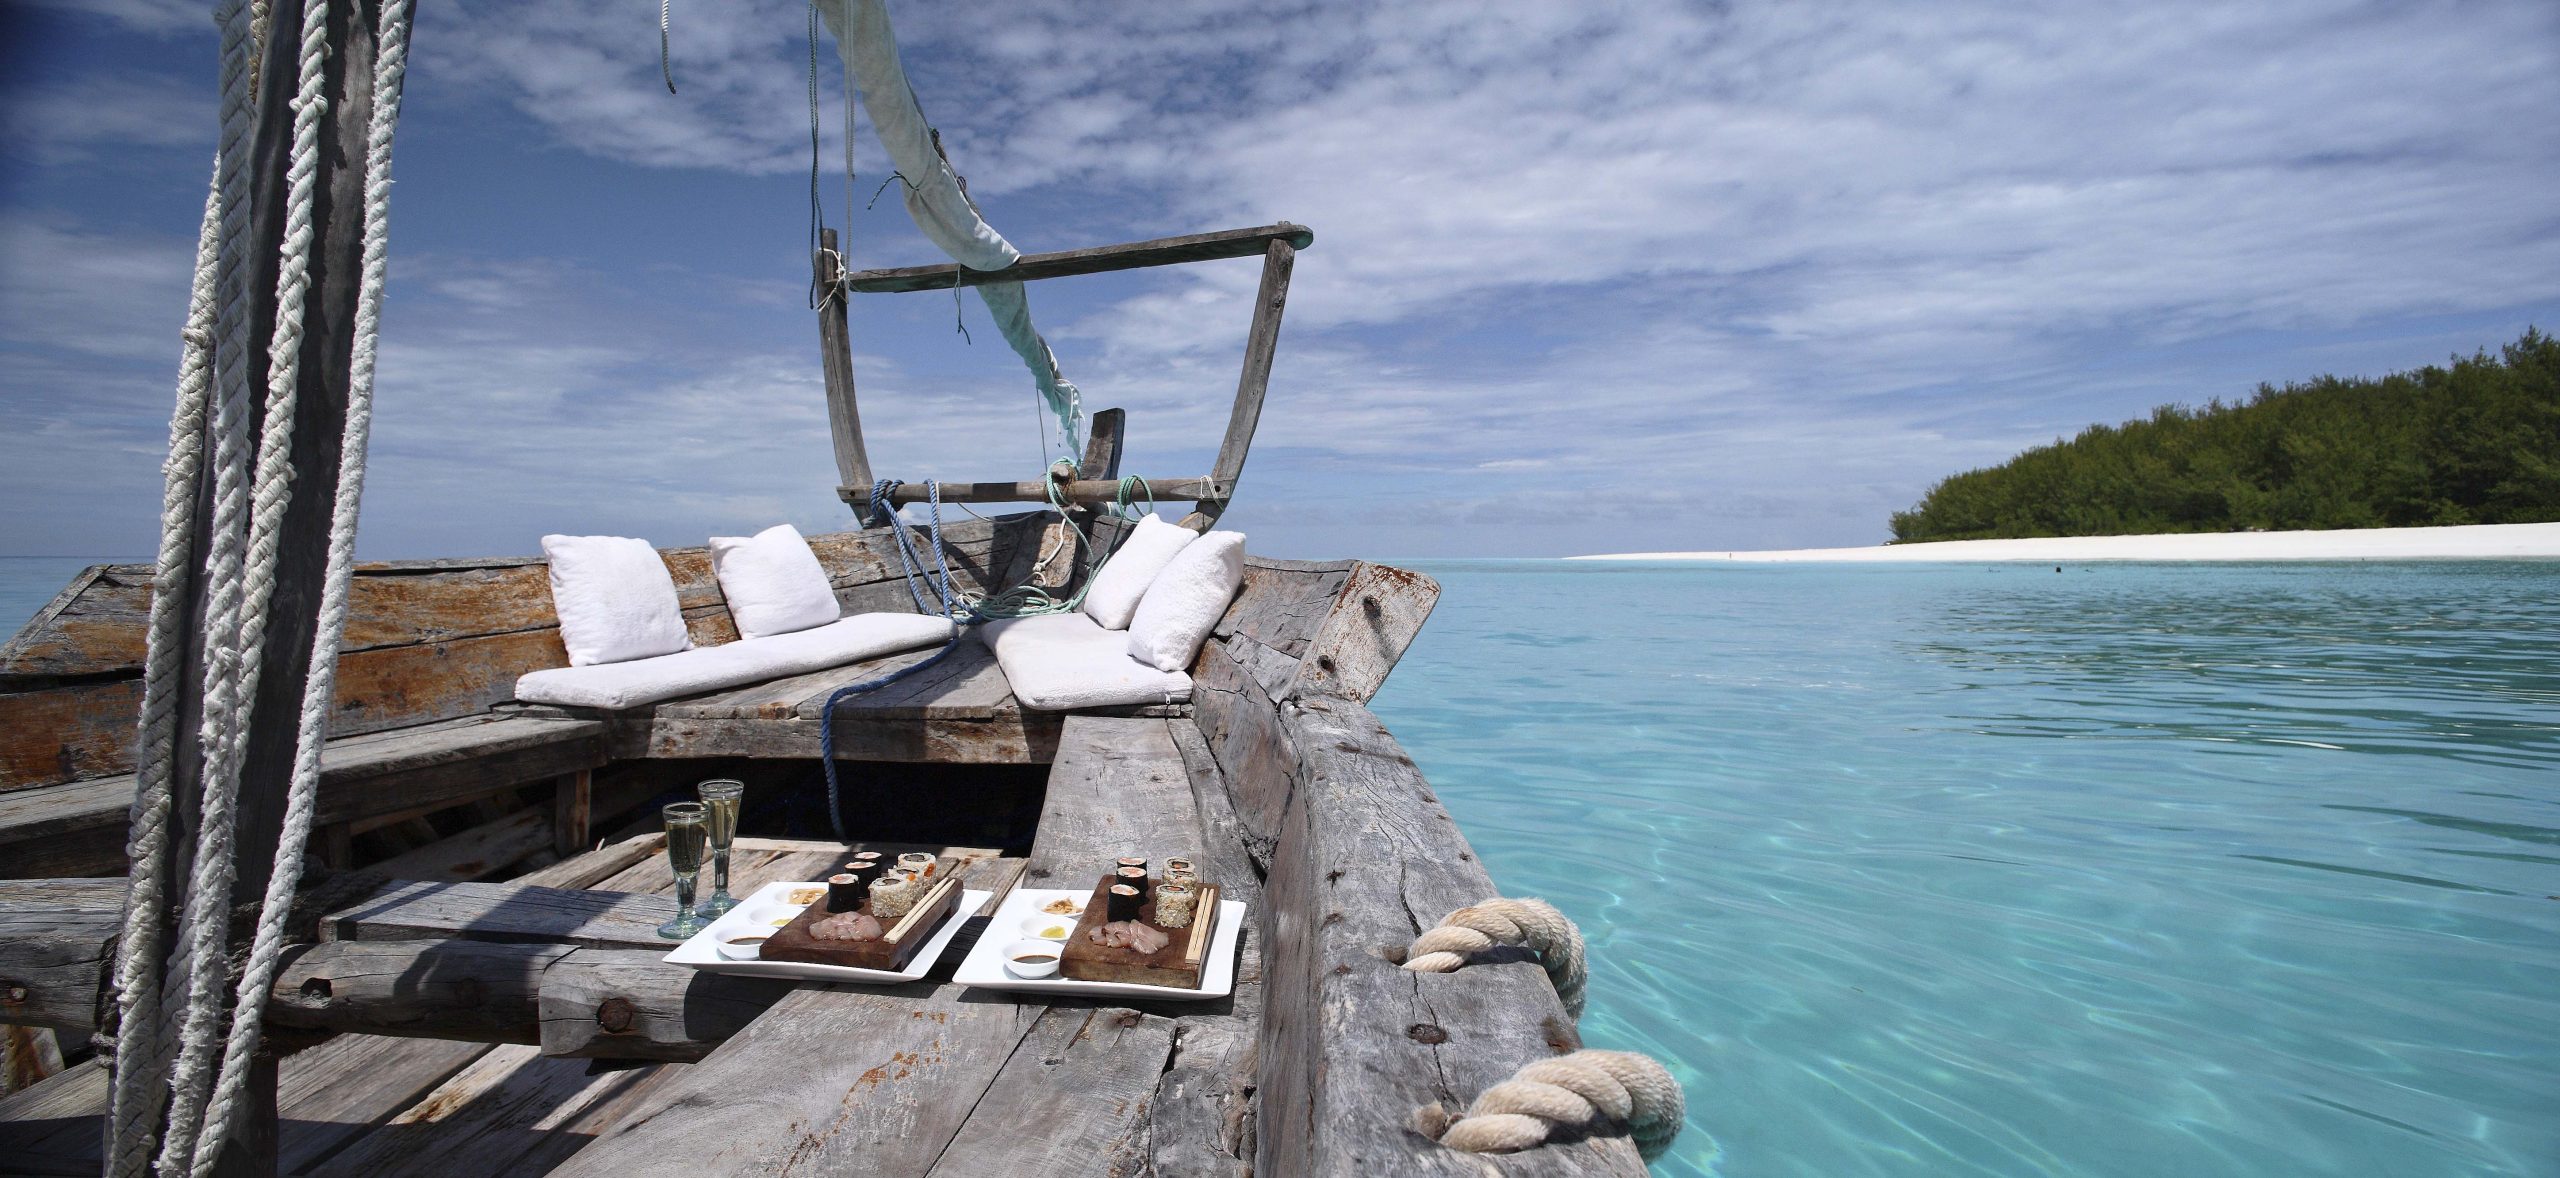 A romantic picnic on a dhow cruise 